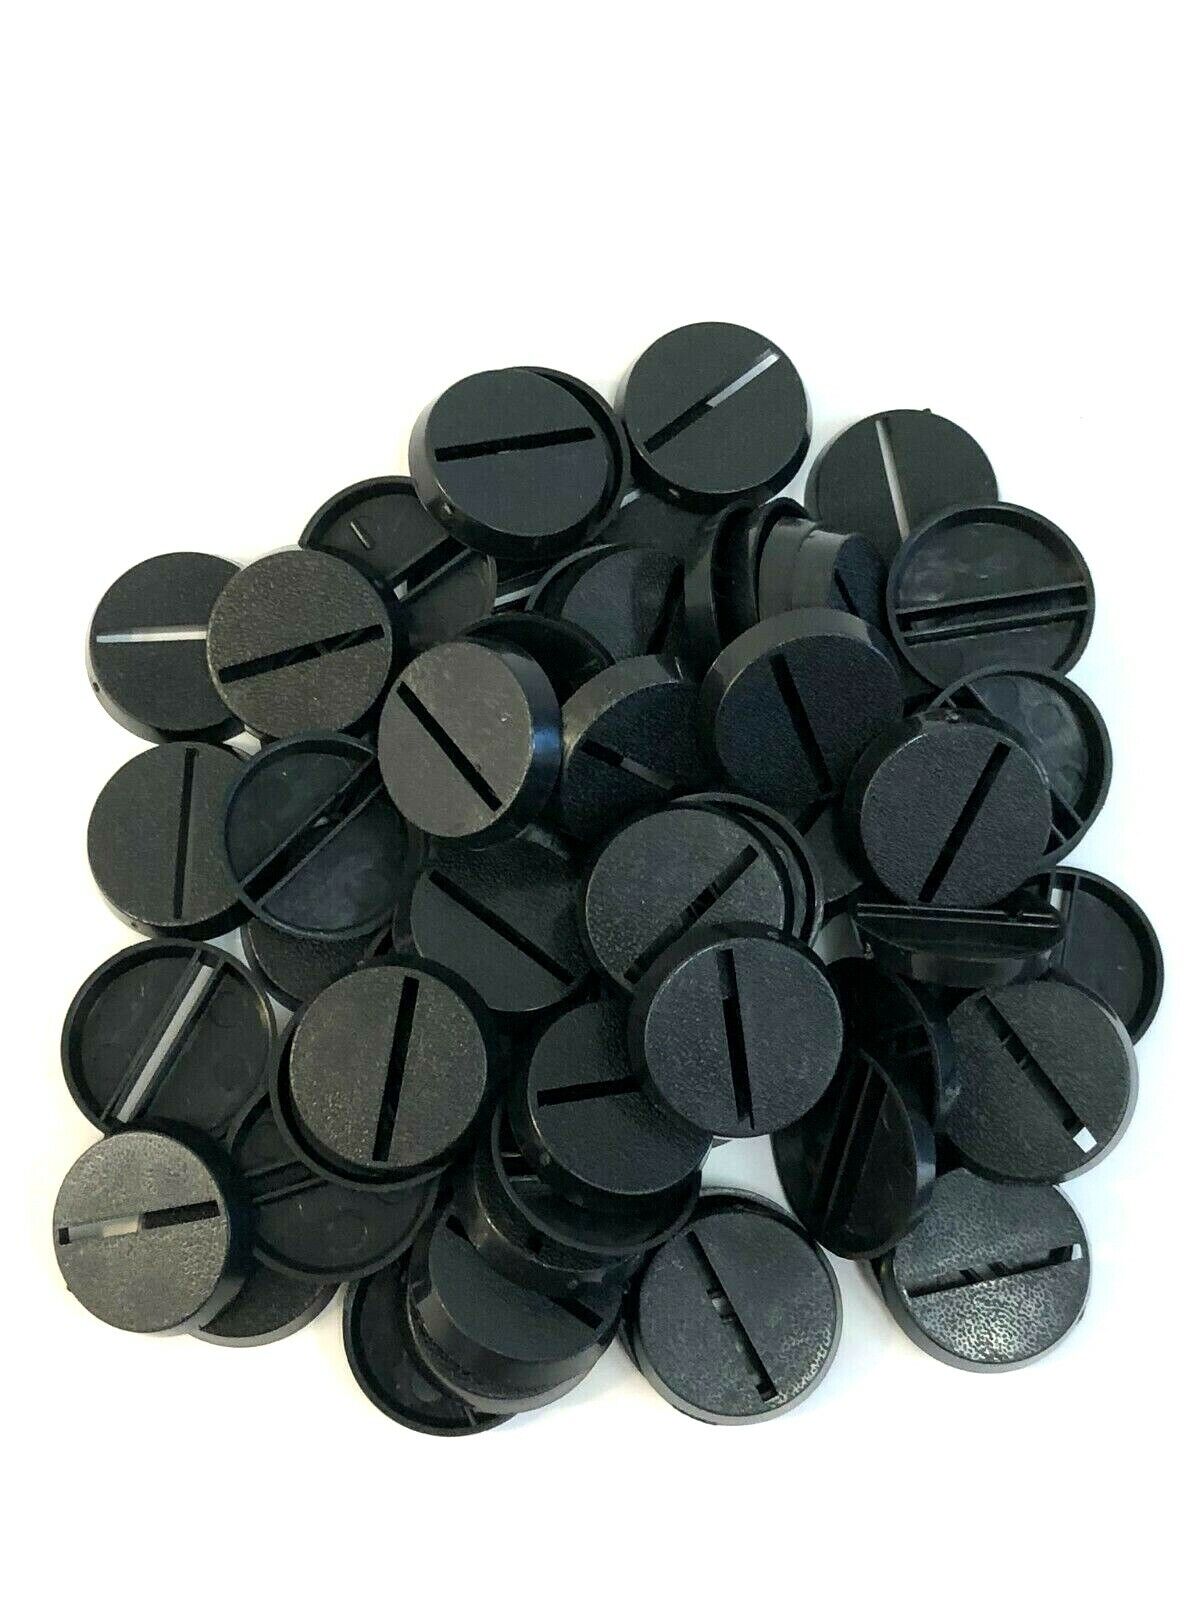 Lot Of 60 25mm Round Slot Bases For Warhammer 40k & AoS Games Workshop Bitz  Unbranded Does Not Apply